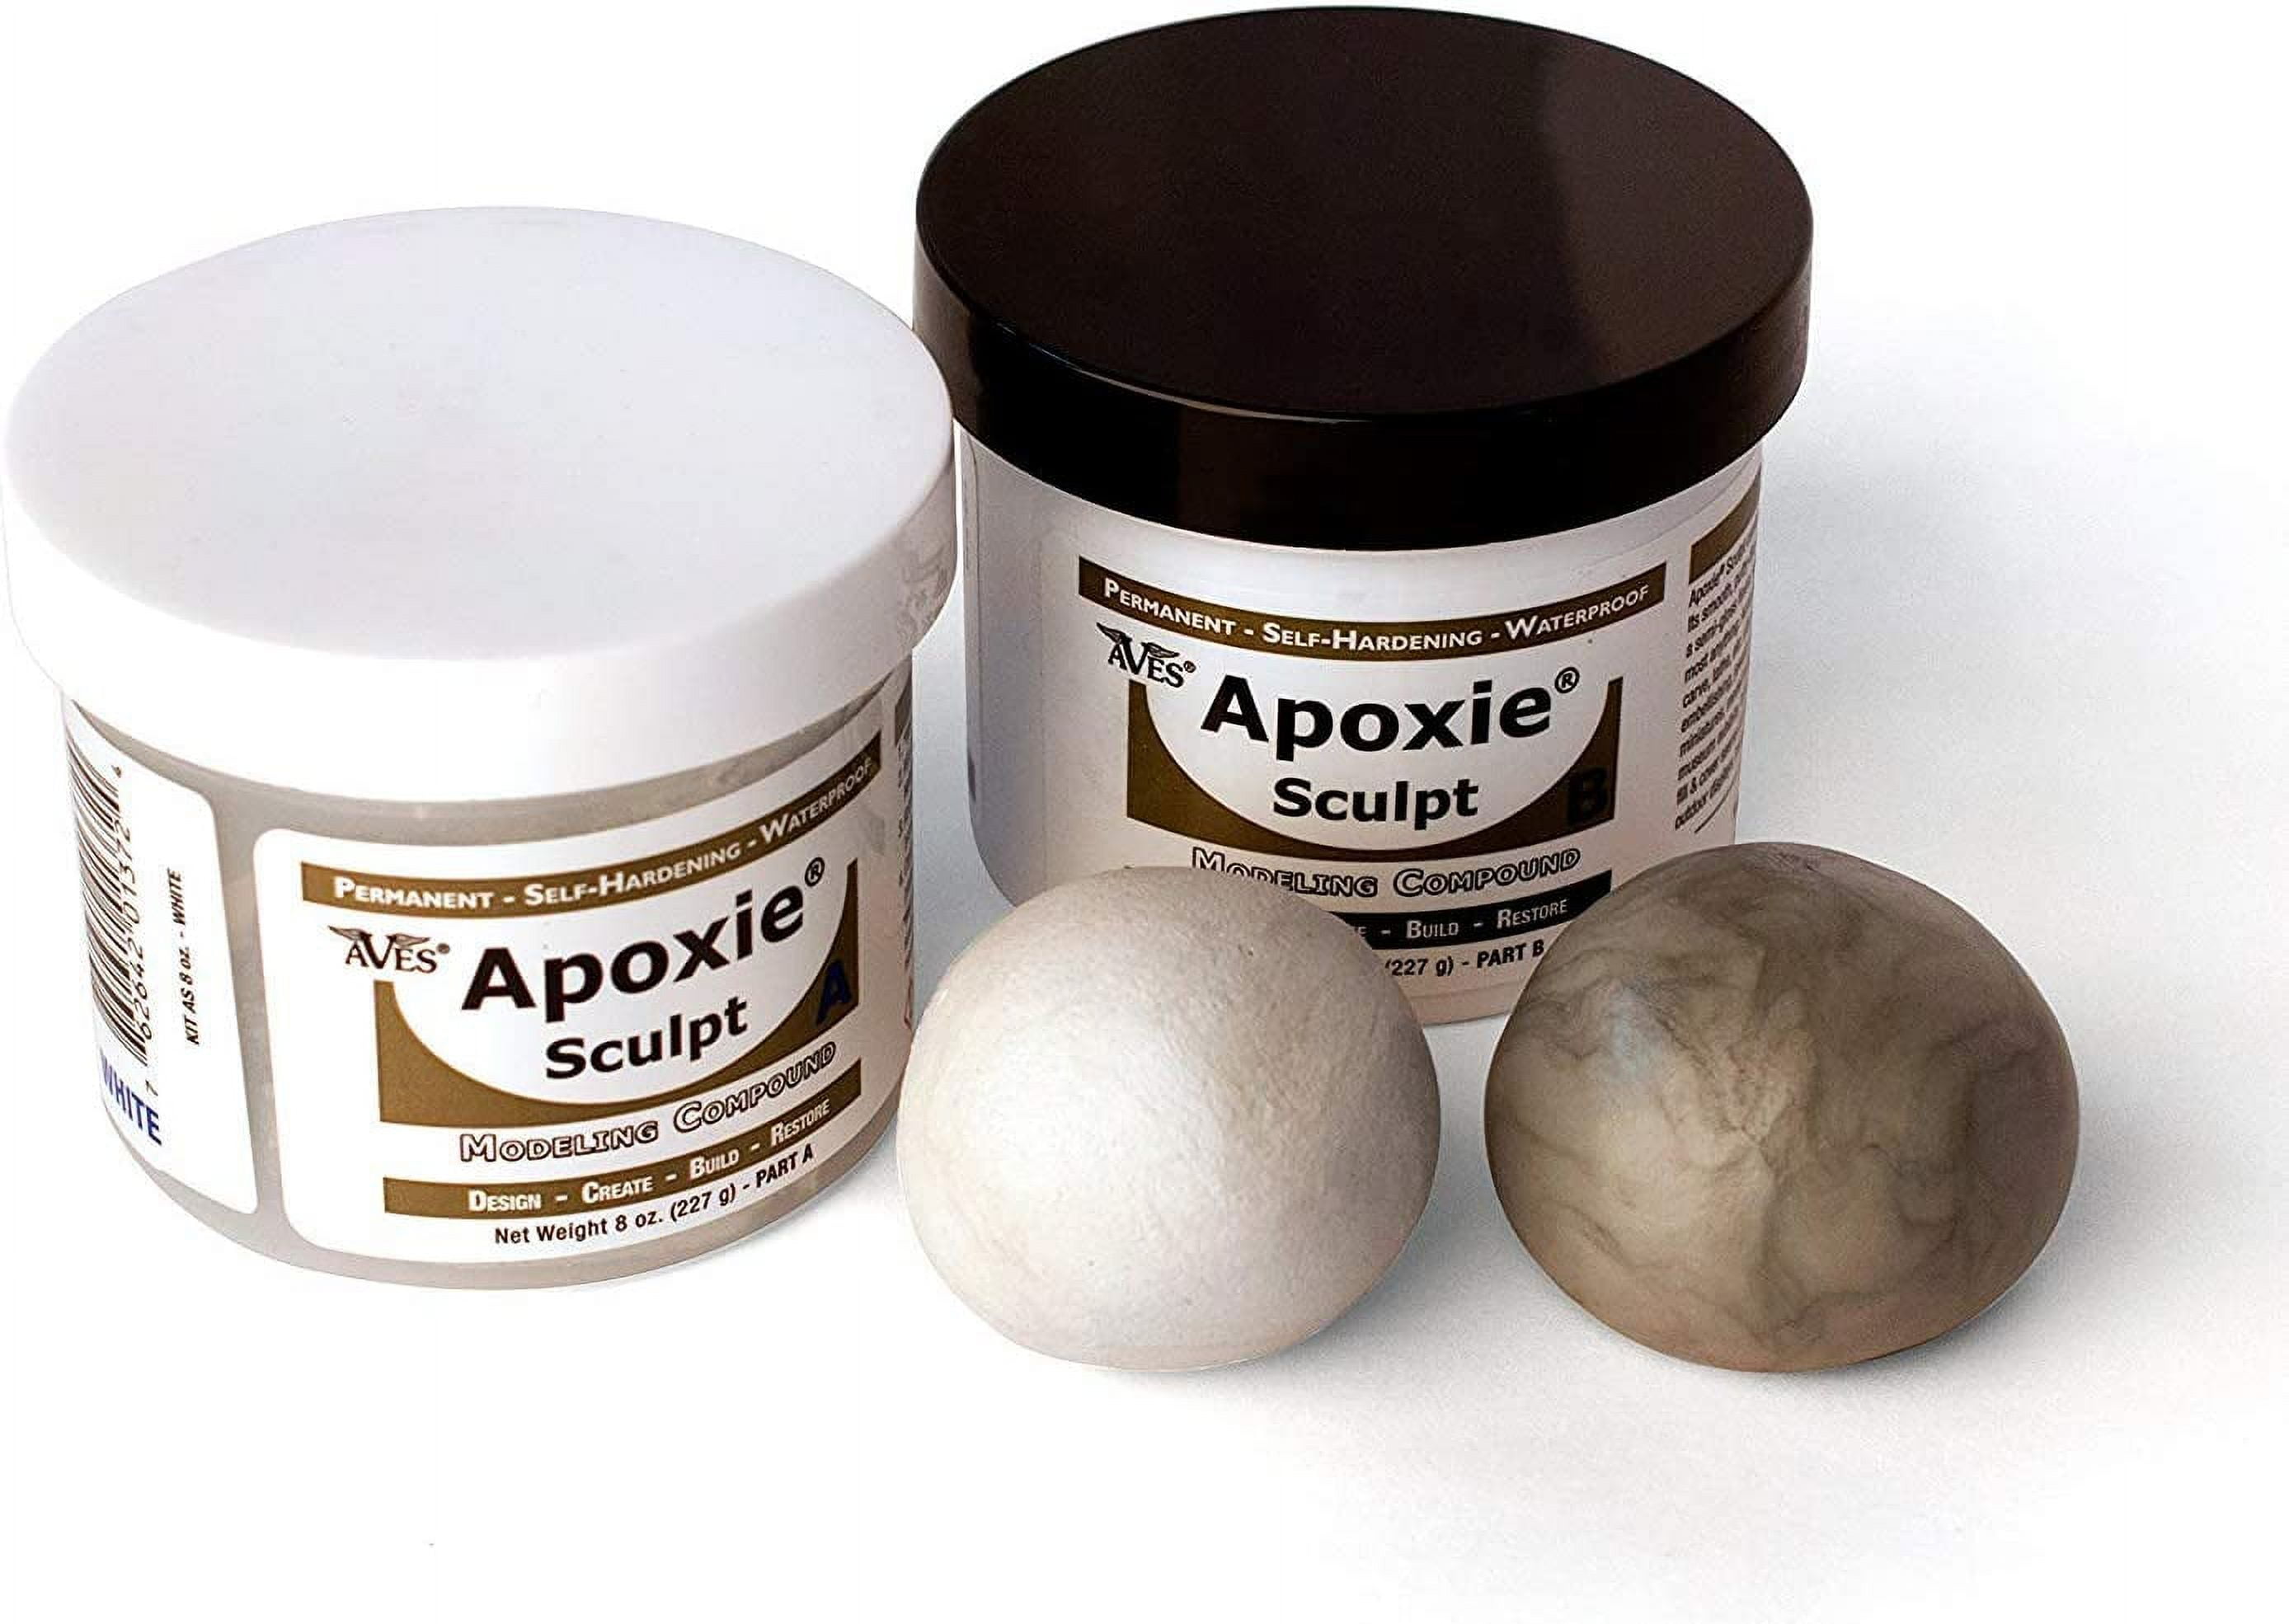  AB Epoxy Sculpt Clay, 2 Part Epoxy Modeling Paste Clay Compound  (A&B), Sculpture Modeling Clay for Sculpting, Modeling, Filling, Repairing  and Retrofitting, White : Arts, Crafts & Sewing